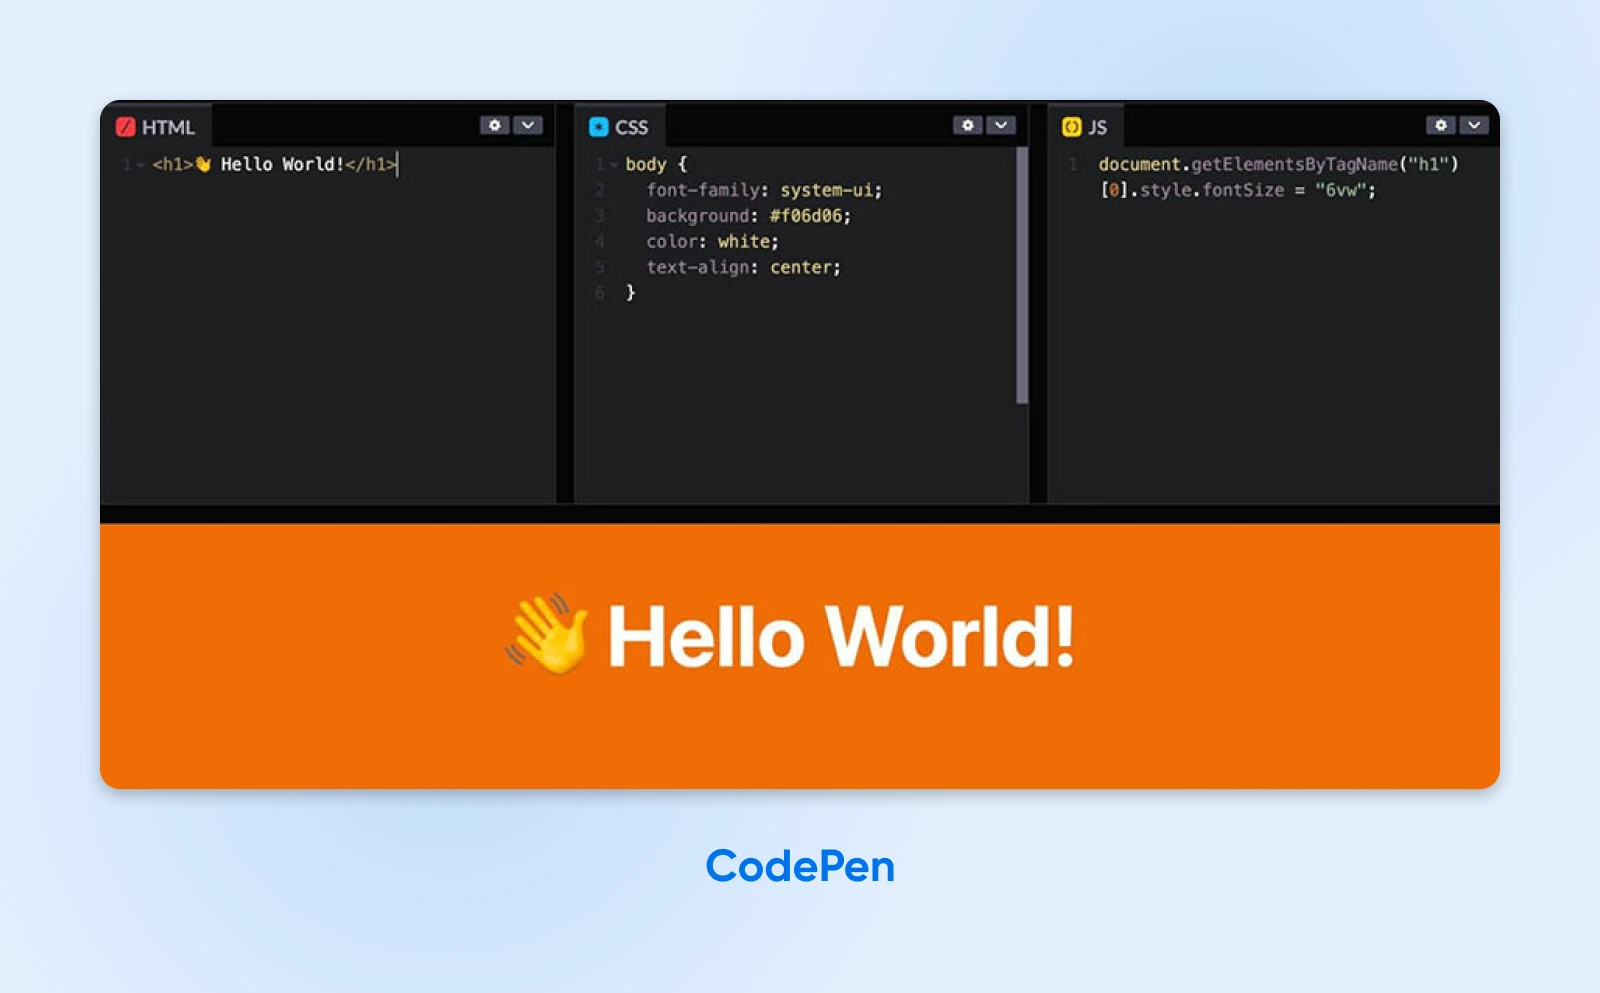 CodePen's editor lets you write code in HTML, CSS, and JS side by side and see your output in a preview pane below